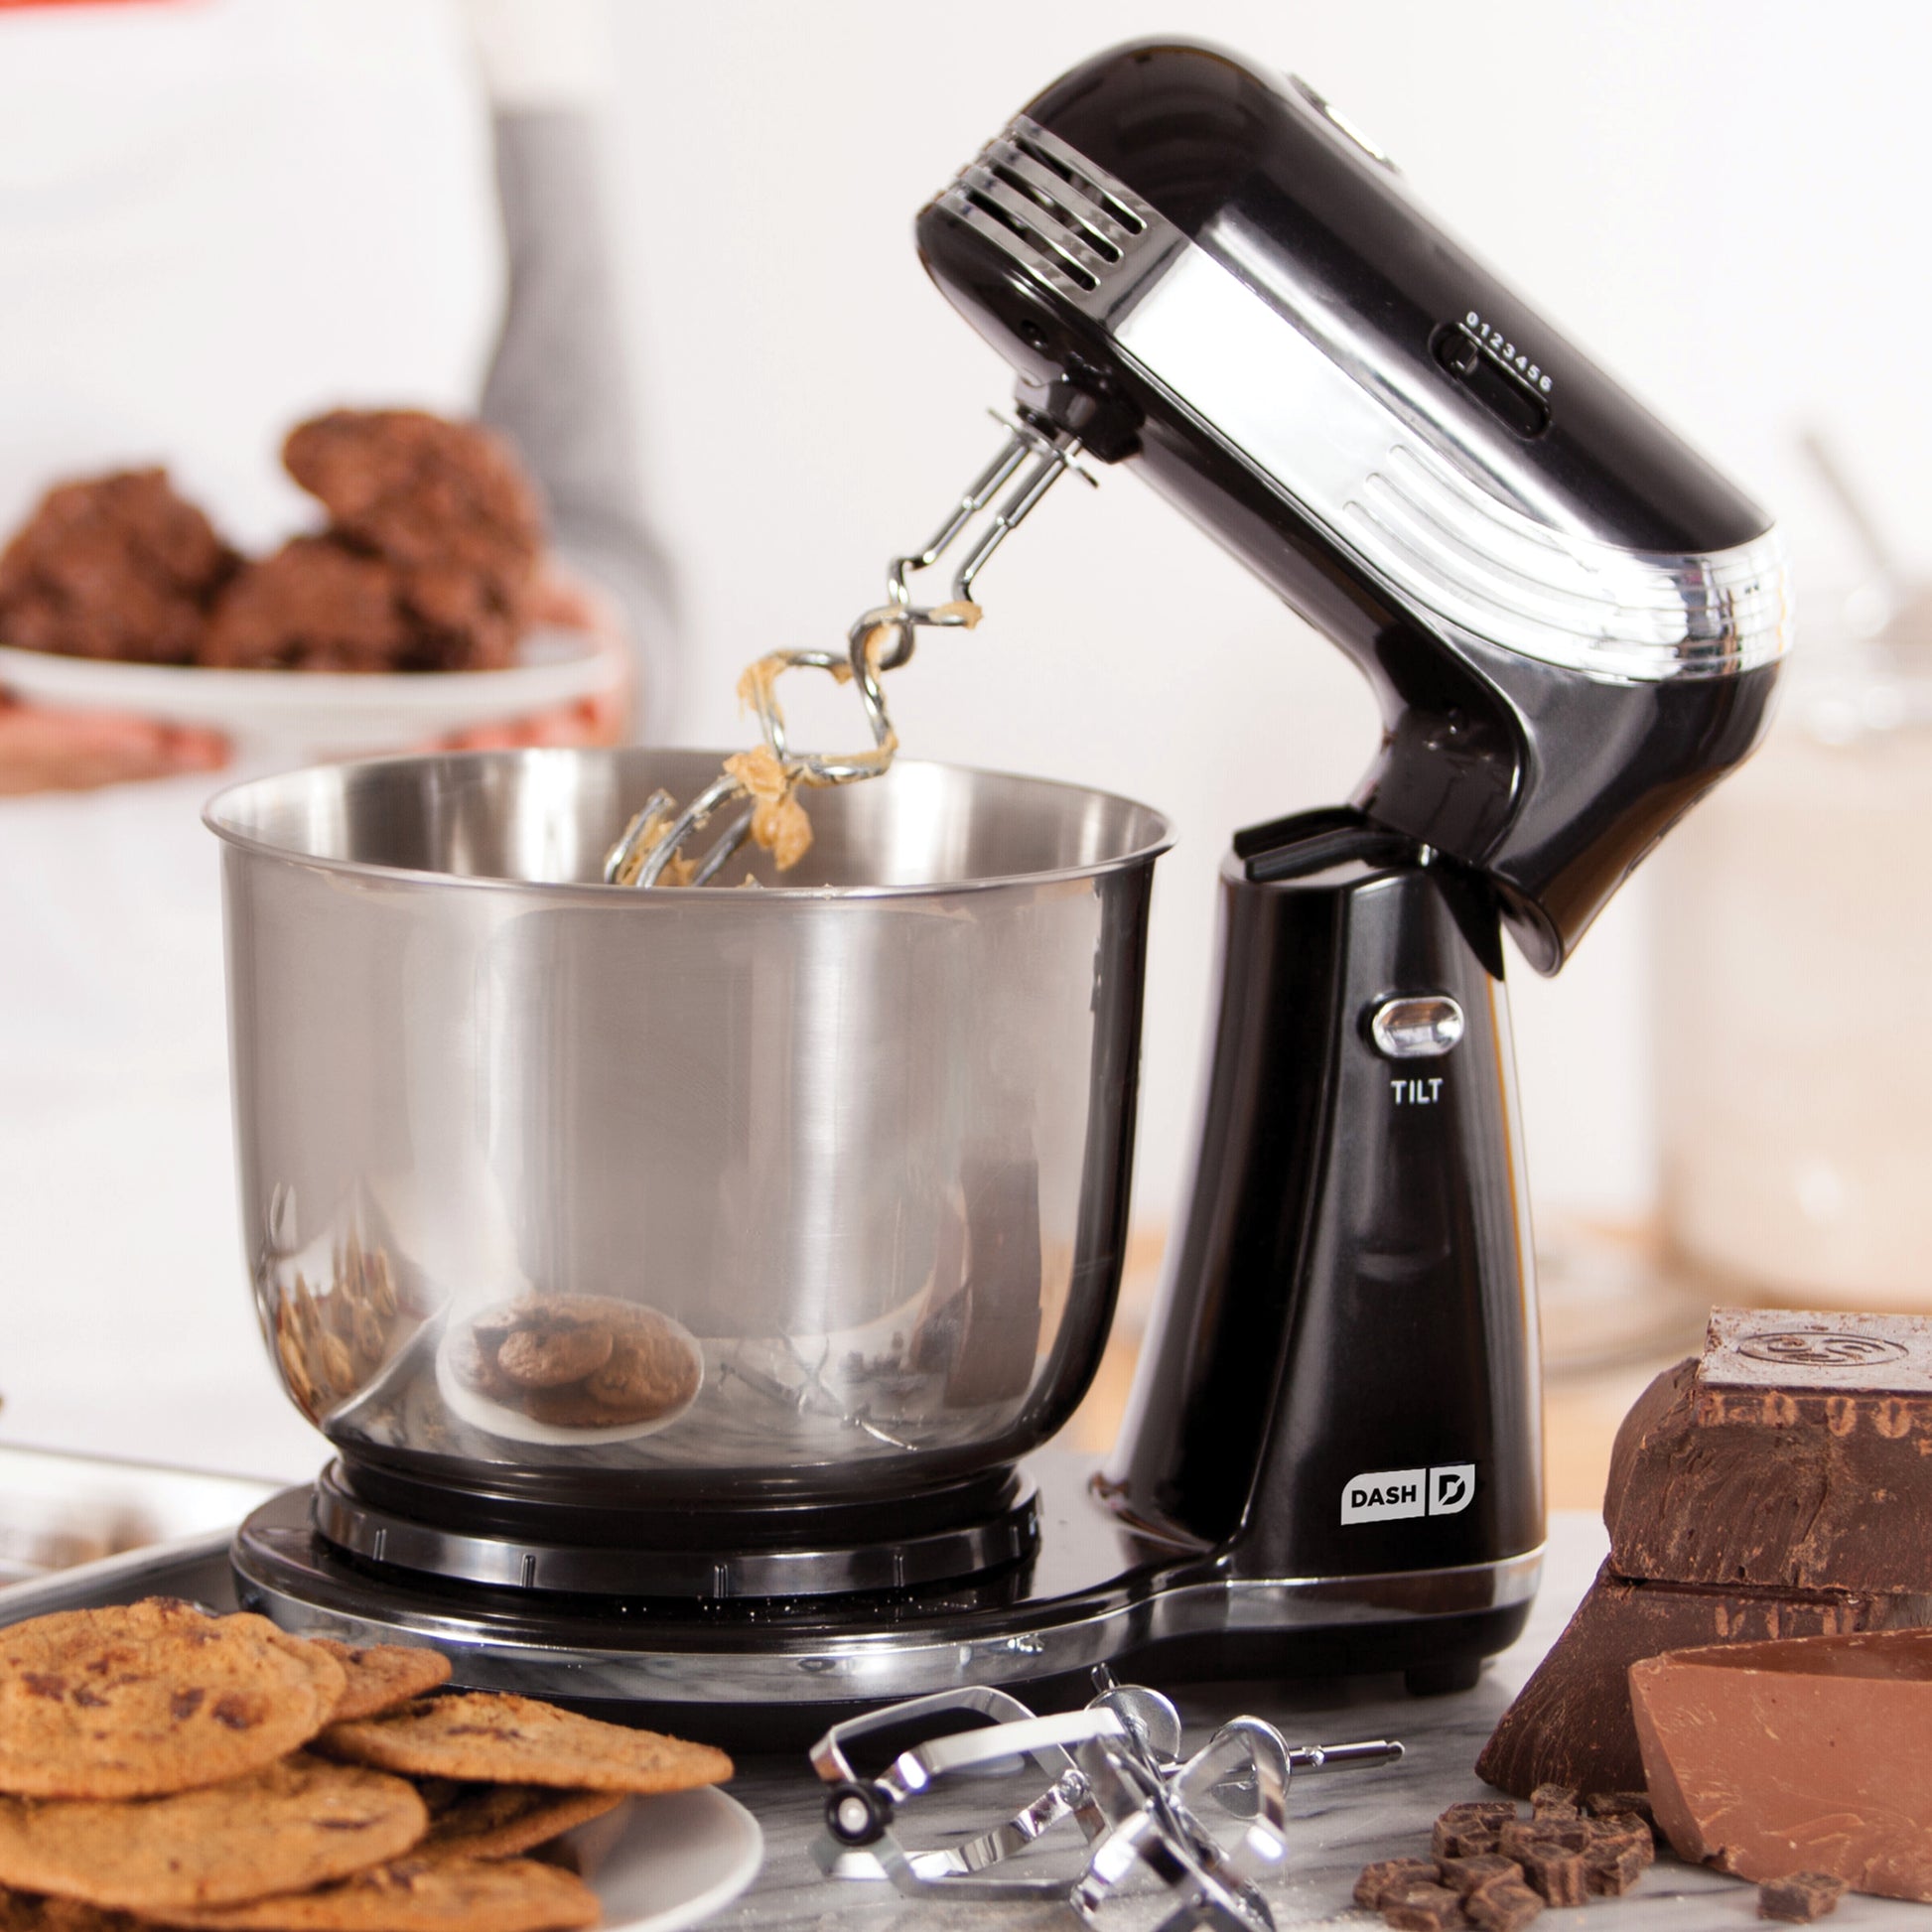 New Year, New Kitchen Gadgets with Rise By Dash!